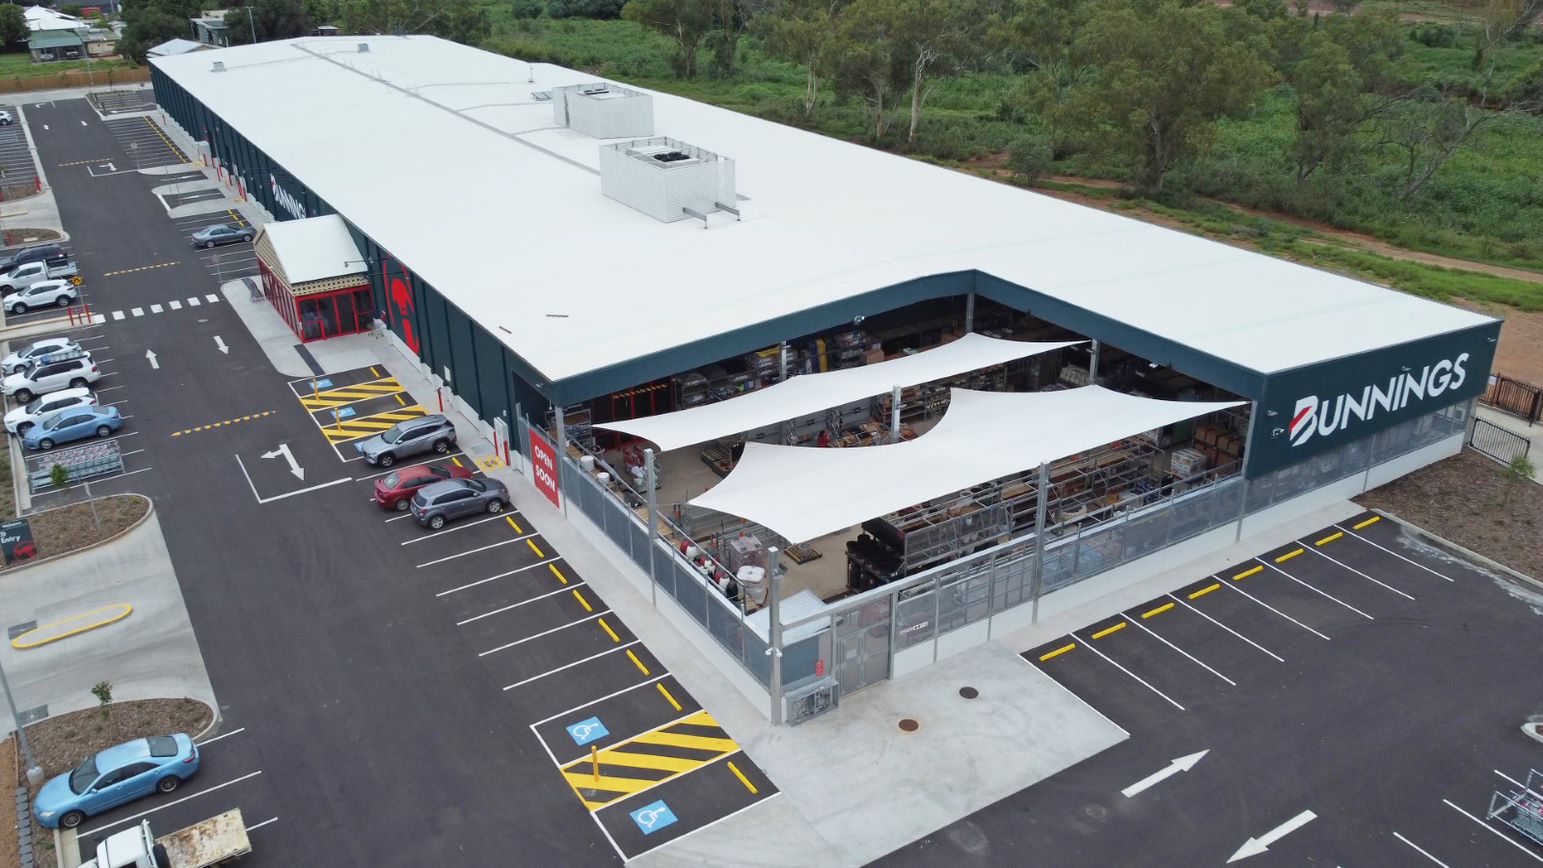 Mt Isa Bunnings commercial retail and hardware store 